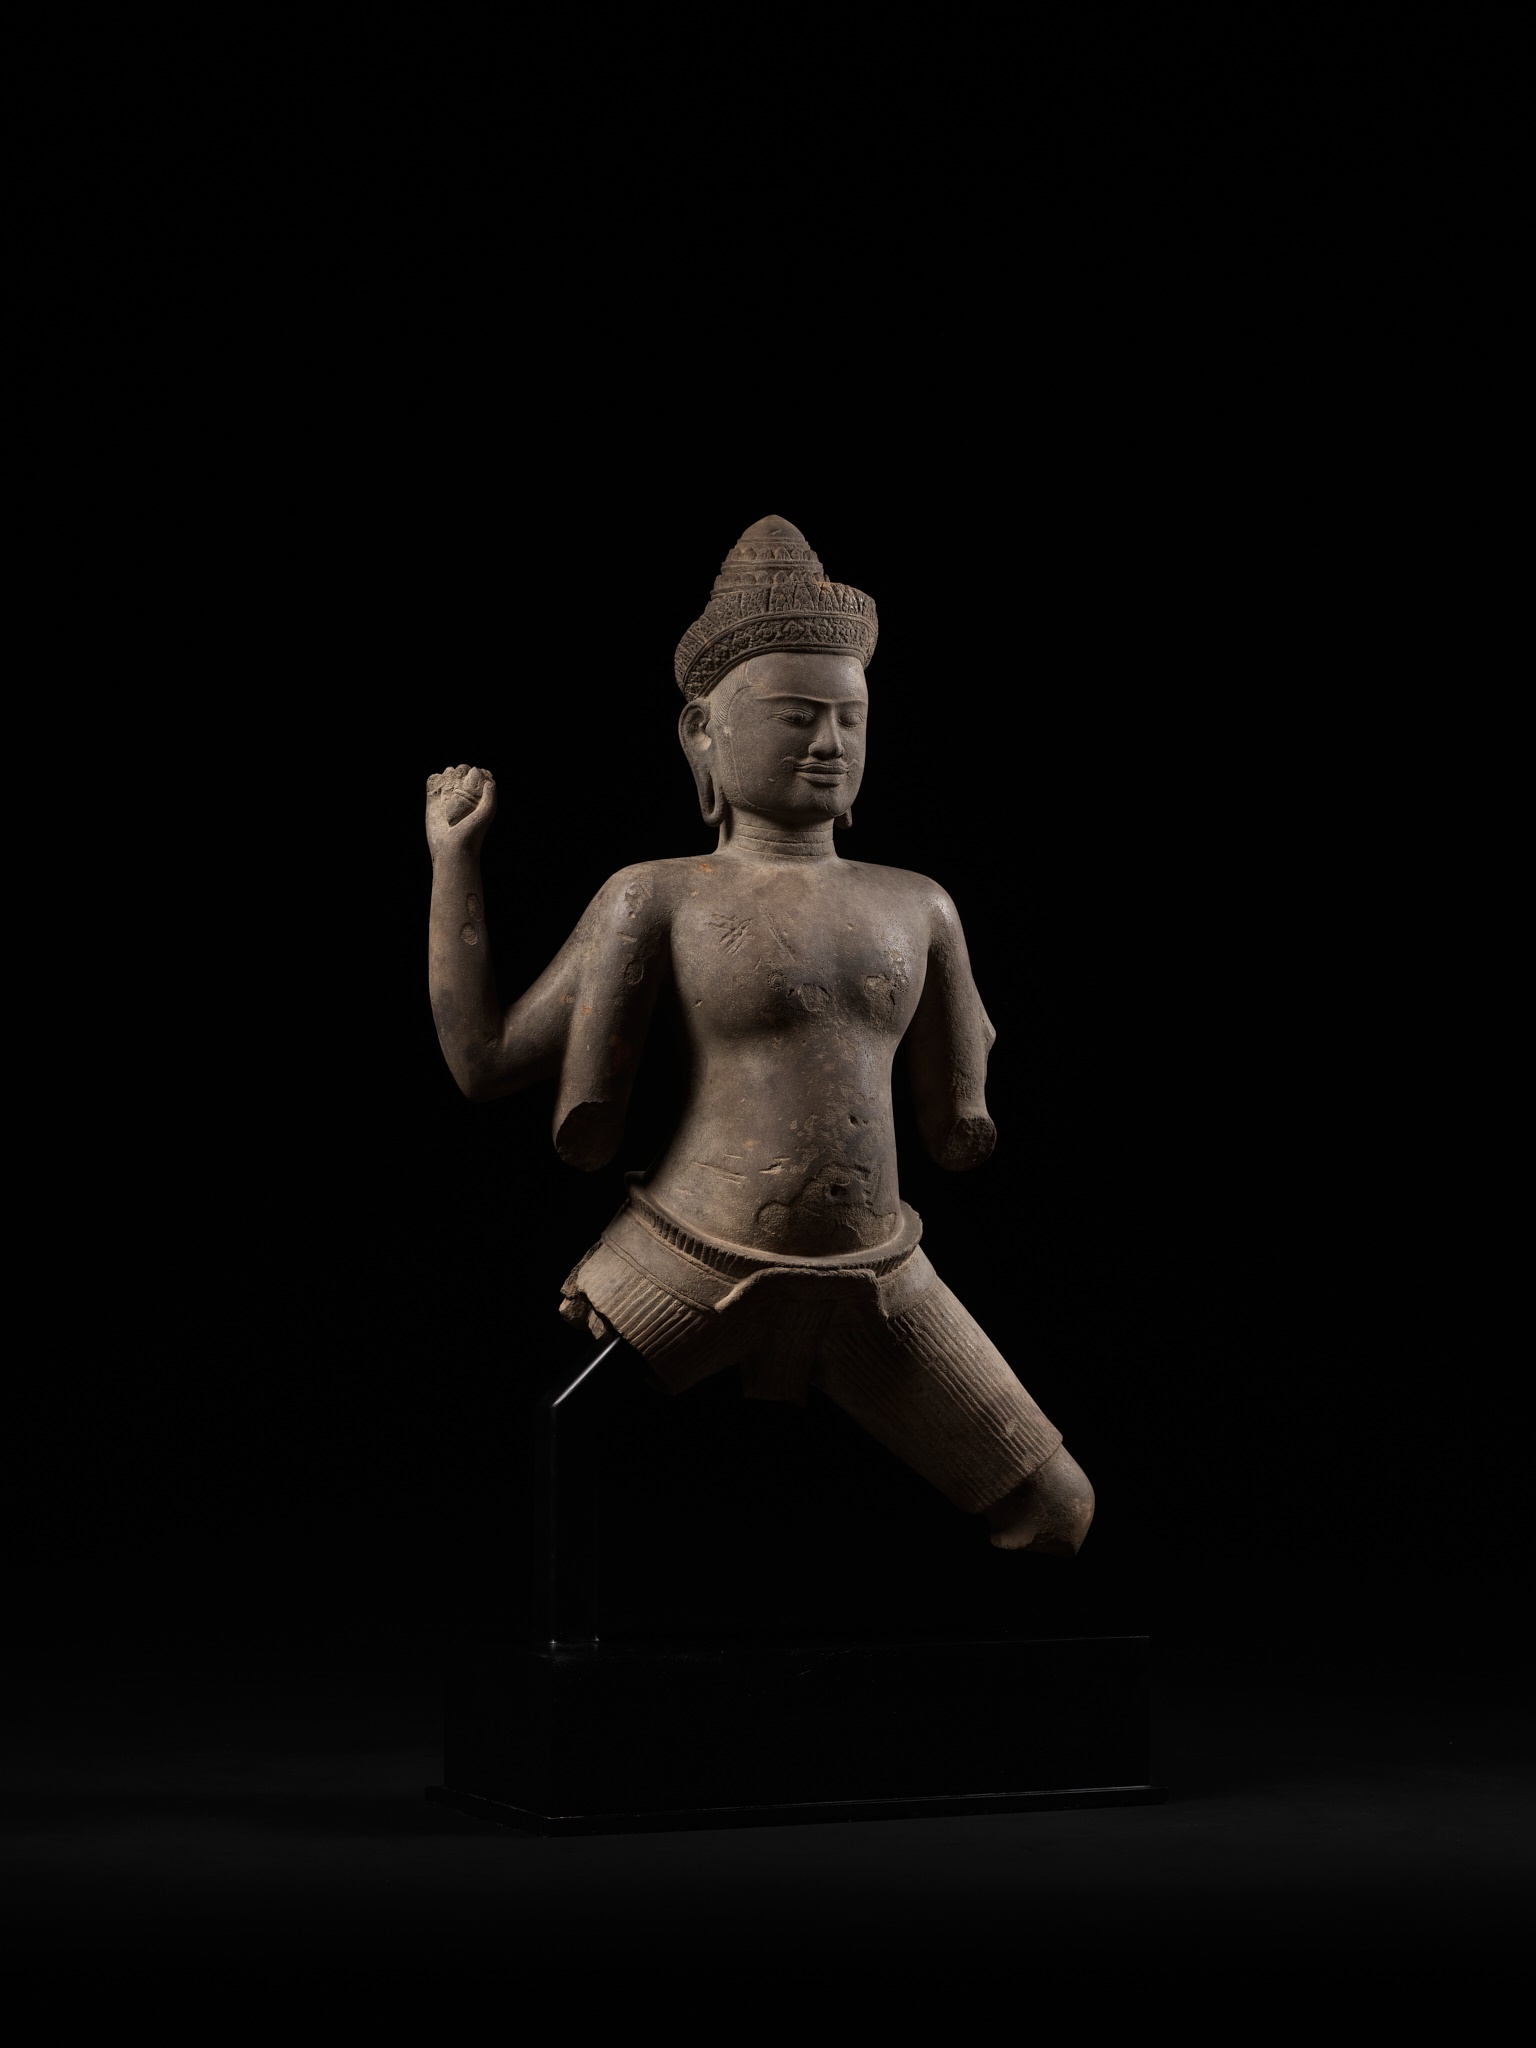 A KHMER SANDSTONE FIGURE OF A MALE DEITY, ANGKOR PERIOD - Image 11 of 13